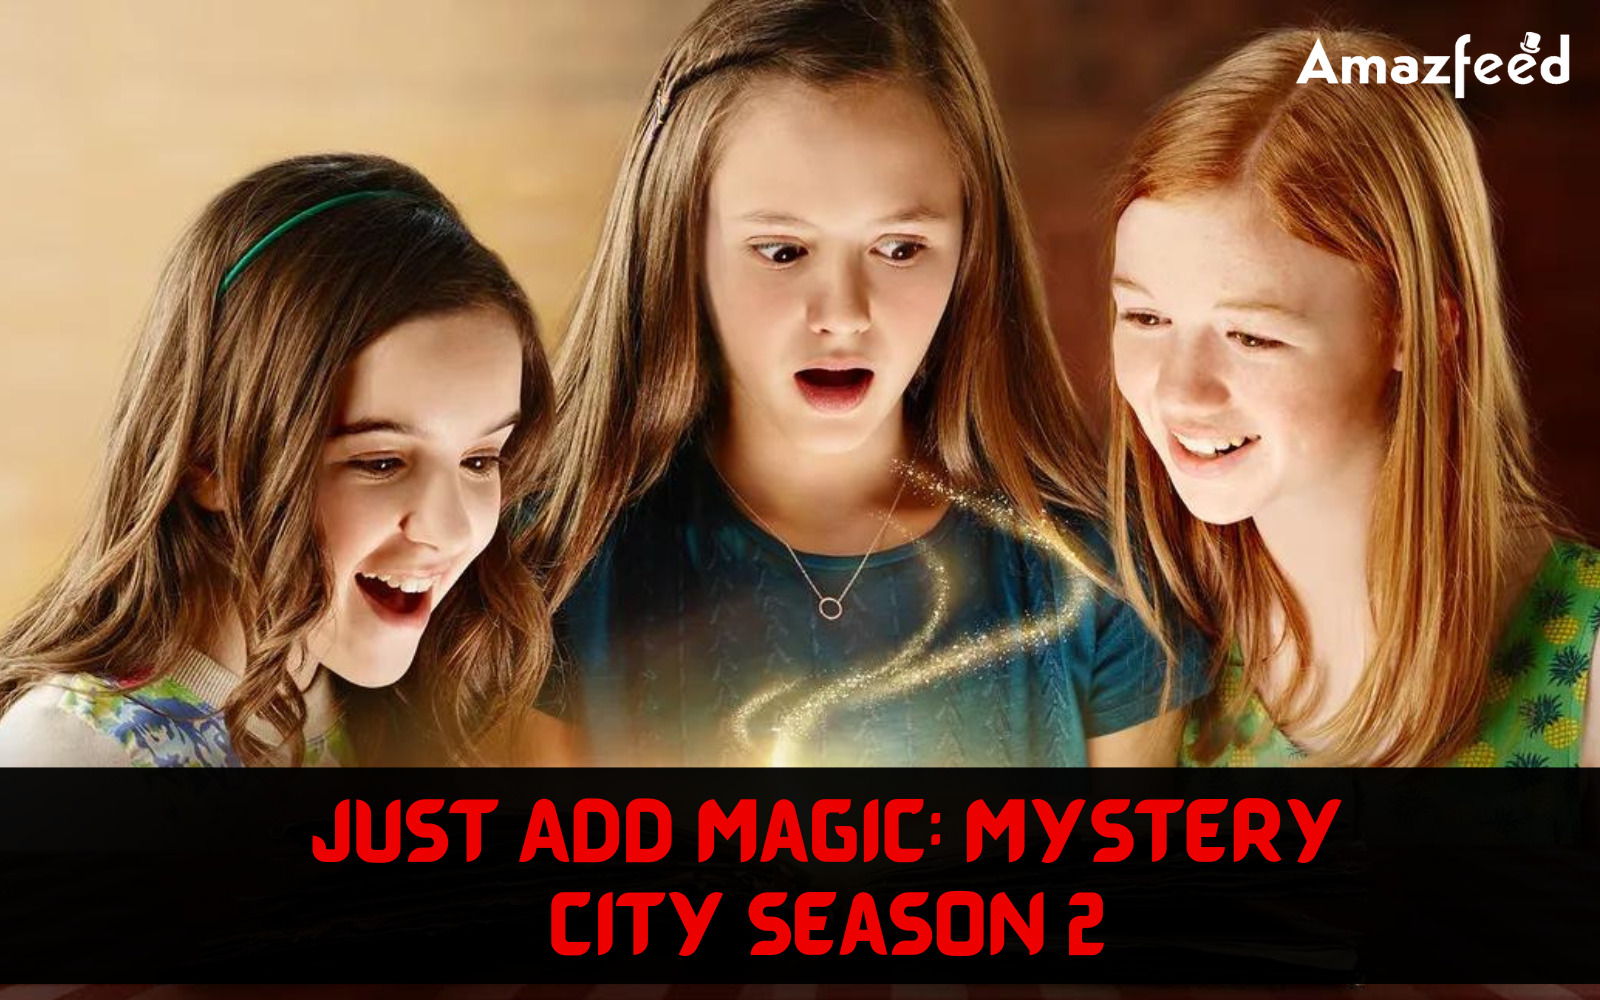 How many Episodes of Just Add Magic Mystery City Season 2 will be there